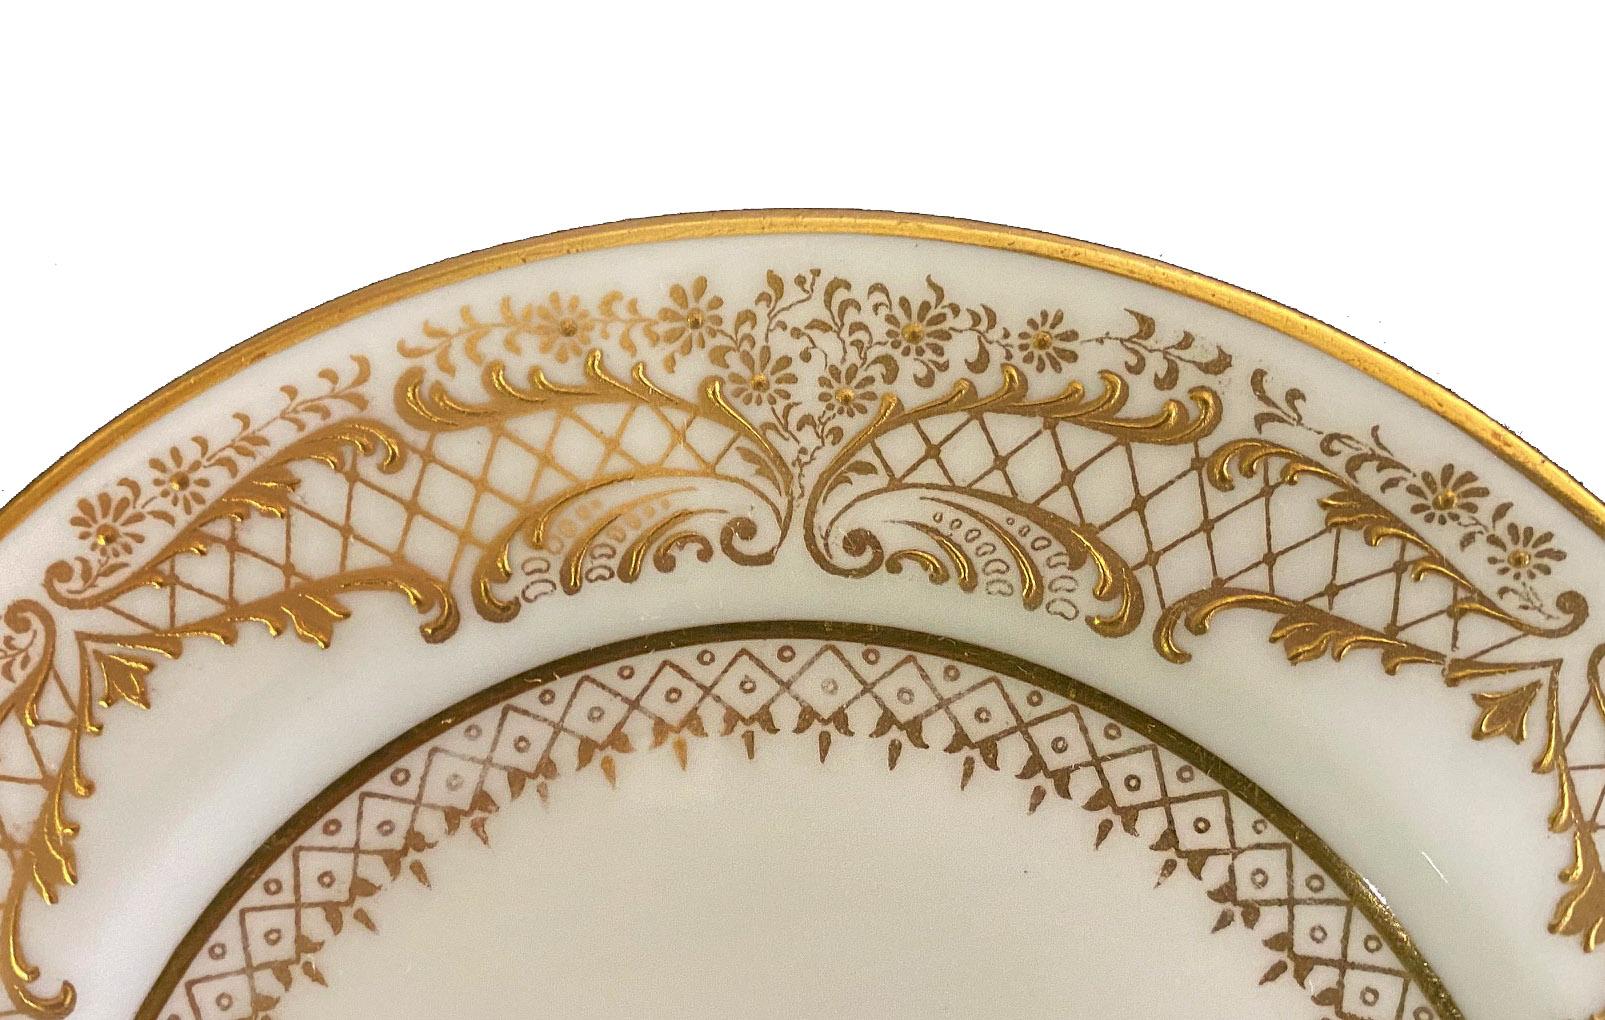 Belle Époque Lovely Set of Fourteen Early 20th Century English Royal Doulton Bread Plates For Sale